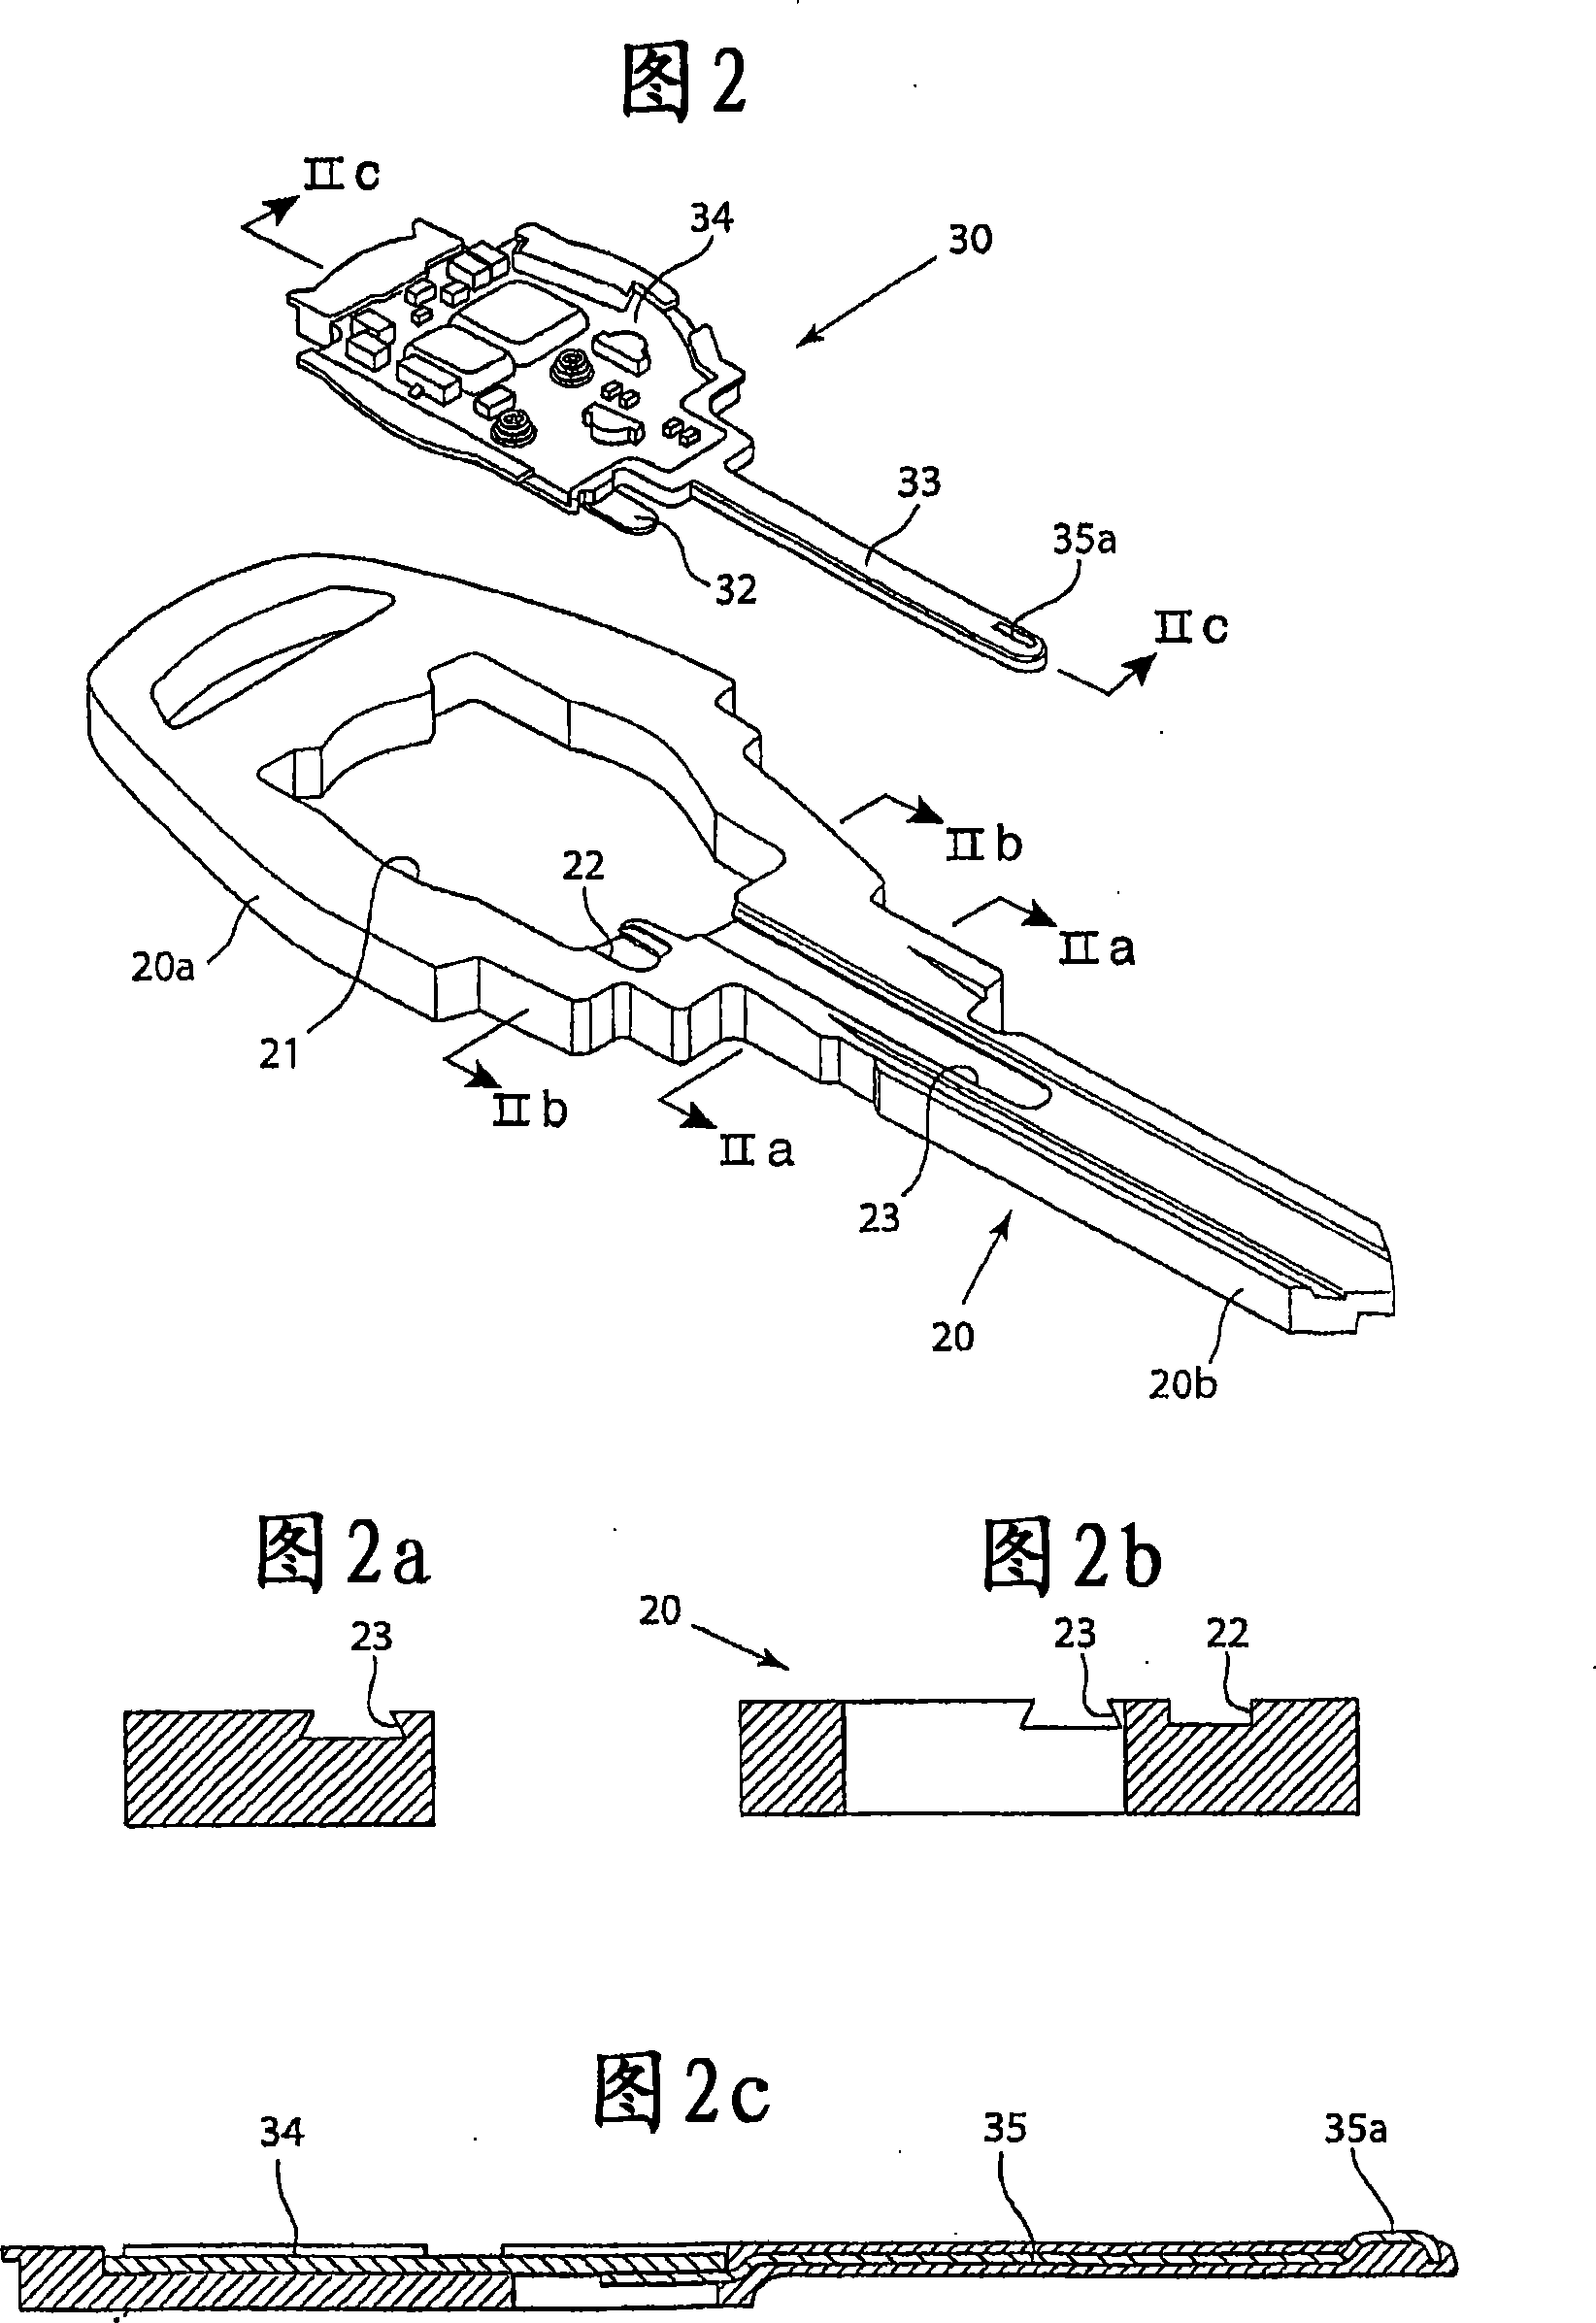 A lock key and a method of its manufacture